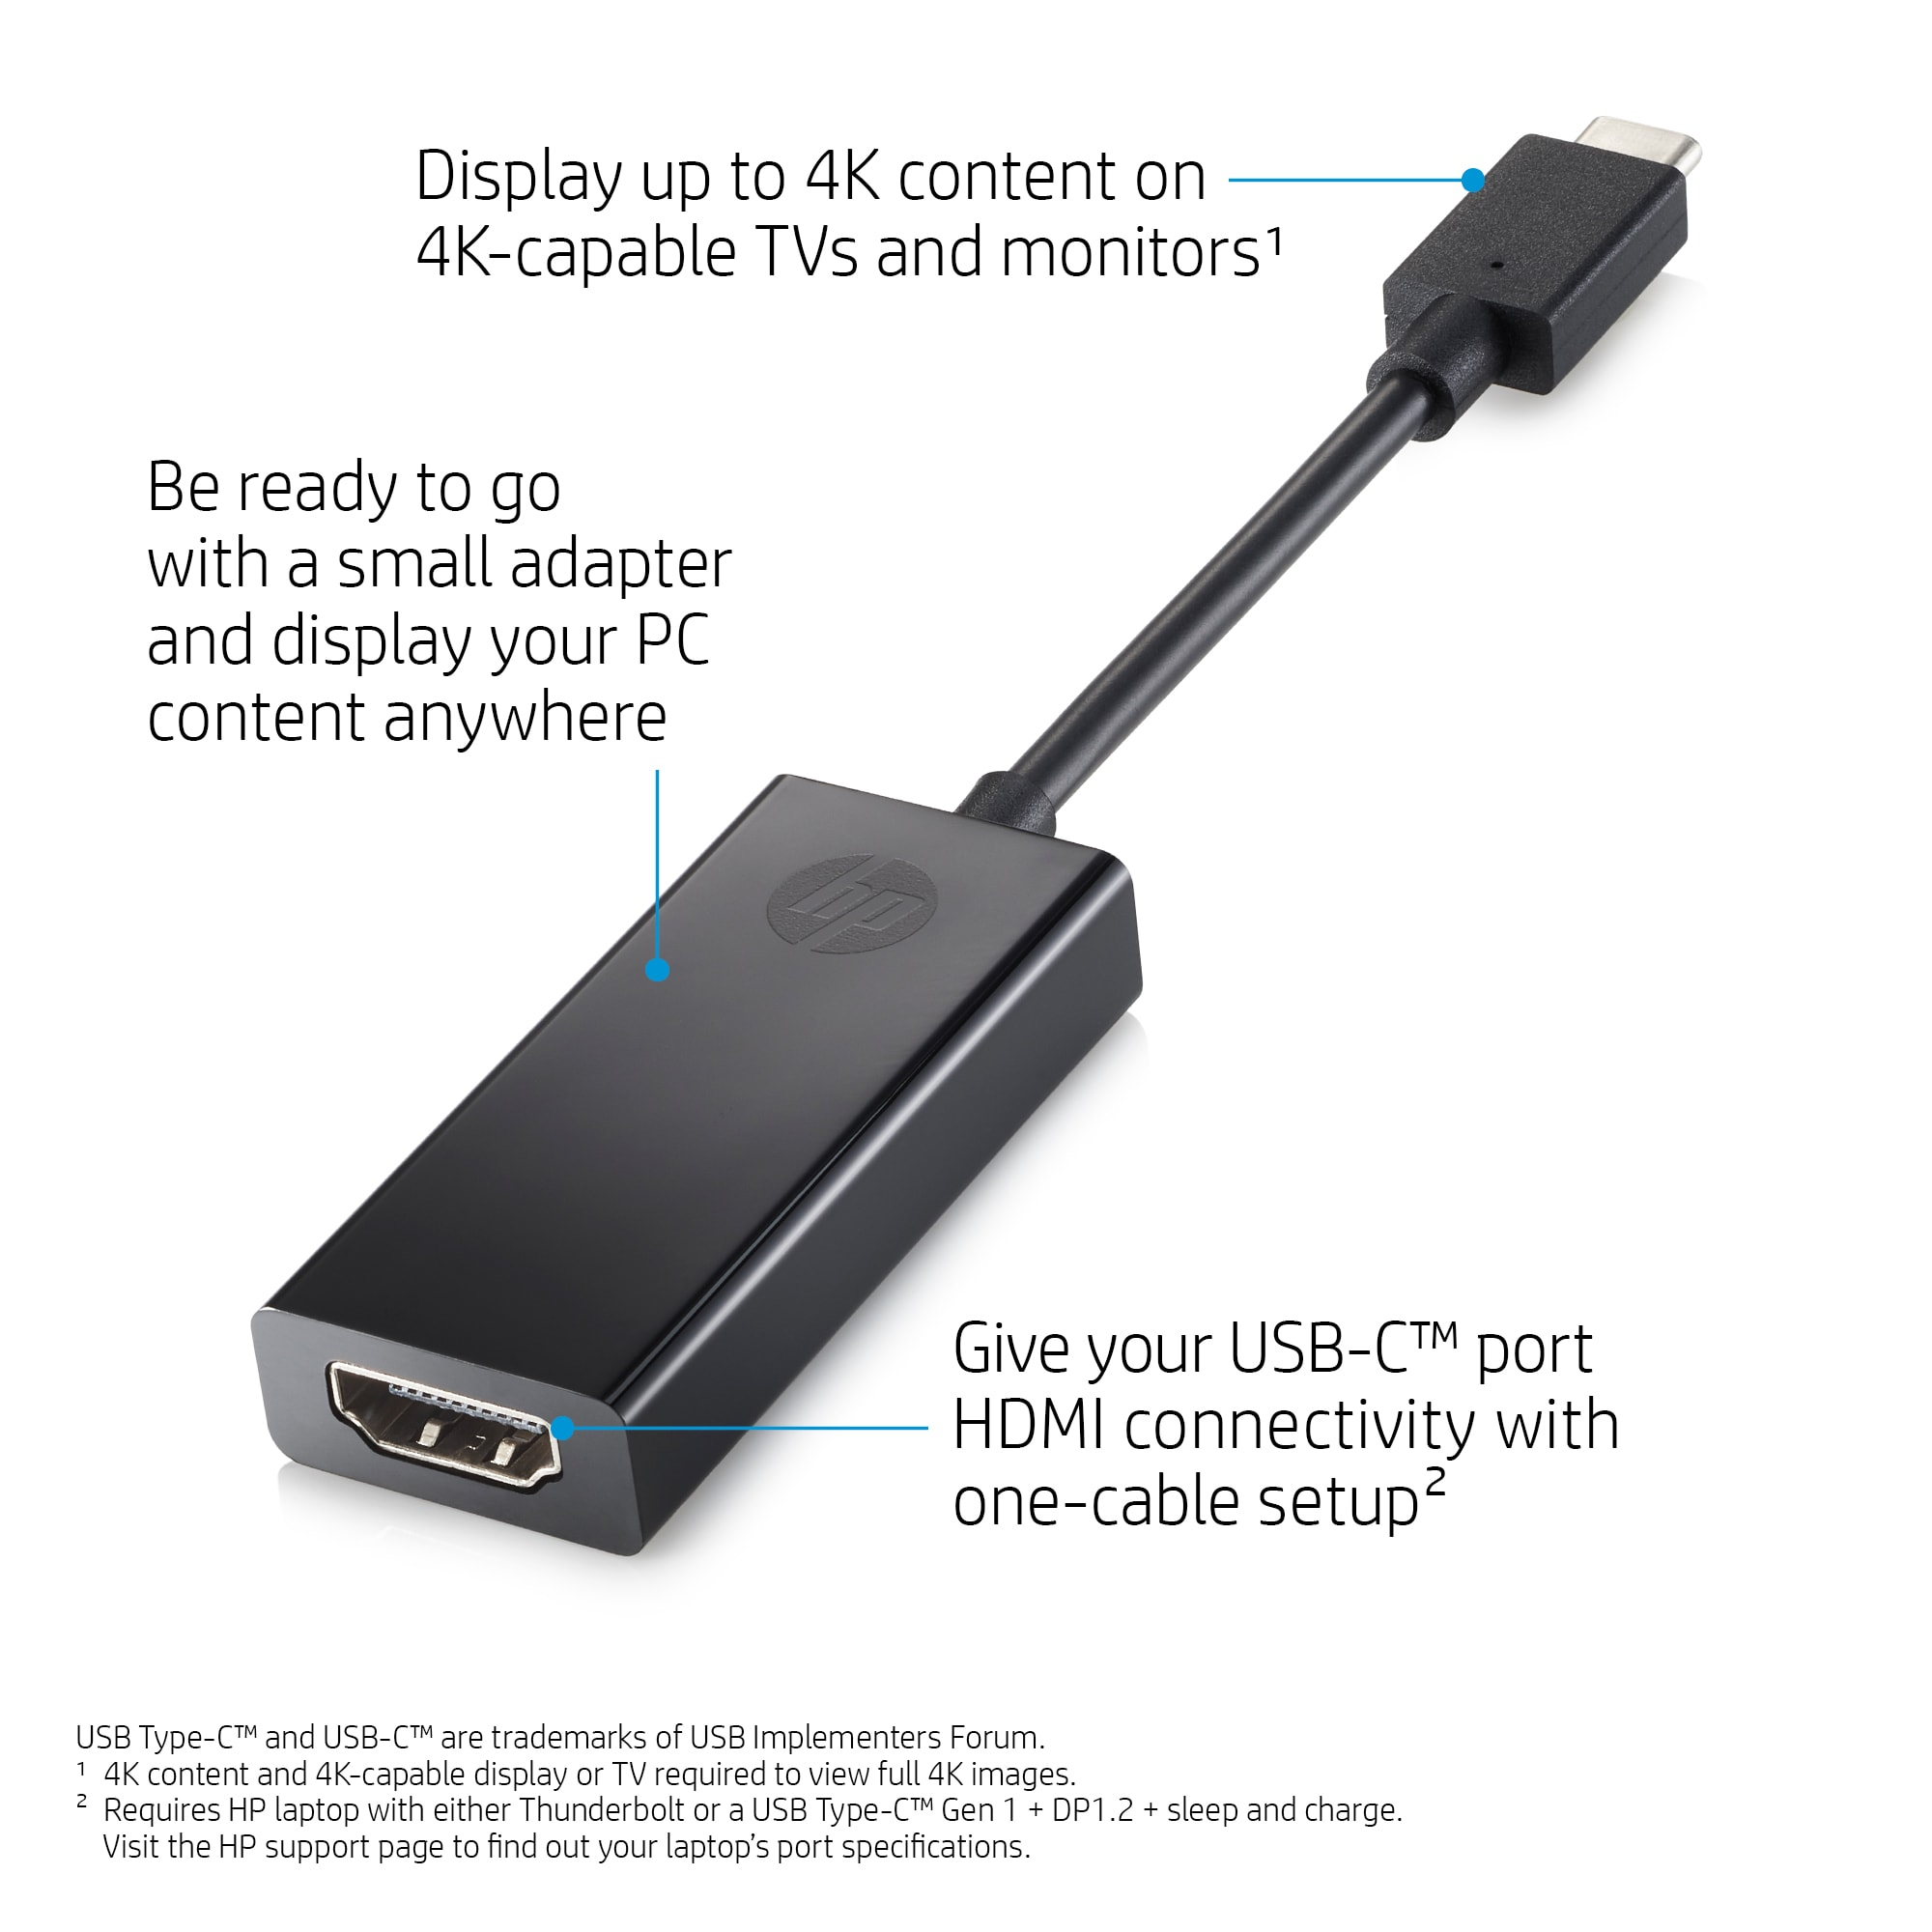 USB C to HDMI Adapter - 4K 60Hz Video, HDR10 - USB-C to HDMI 2.0b Adapter  Dongle - USB Type-C DP Alt Mode to HDMI Monitor/Display/TV - USB C to HDMI